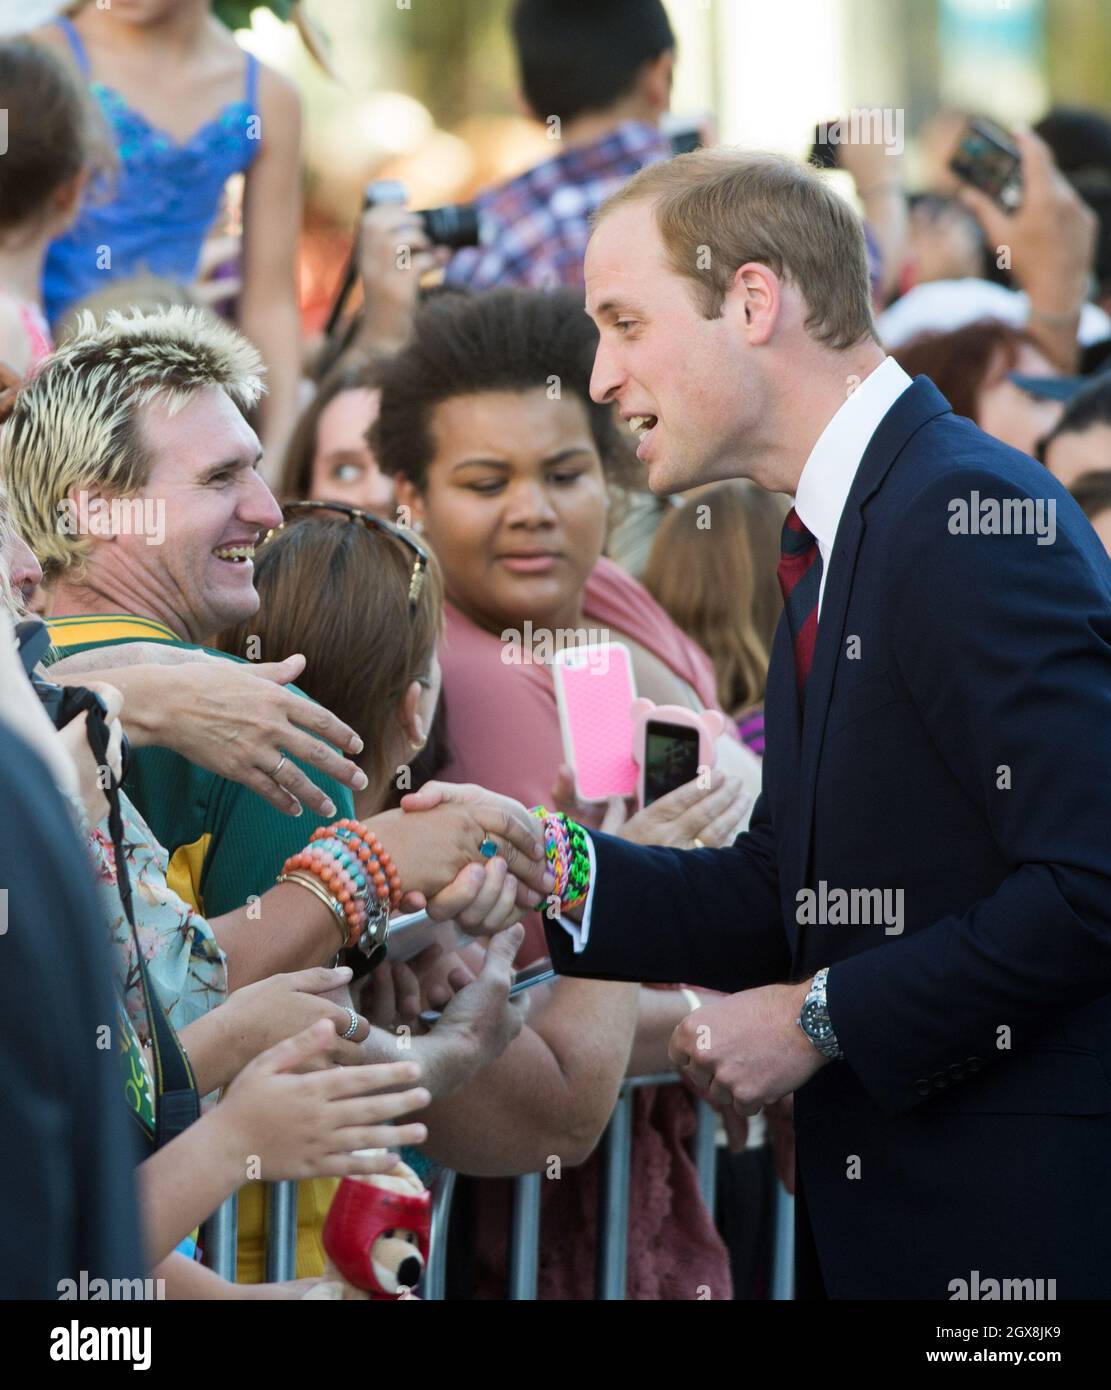 Prince William, Duke of Cambridge greets well wishers during a walkabout in Brisbane, Australia.  Stock Photo